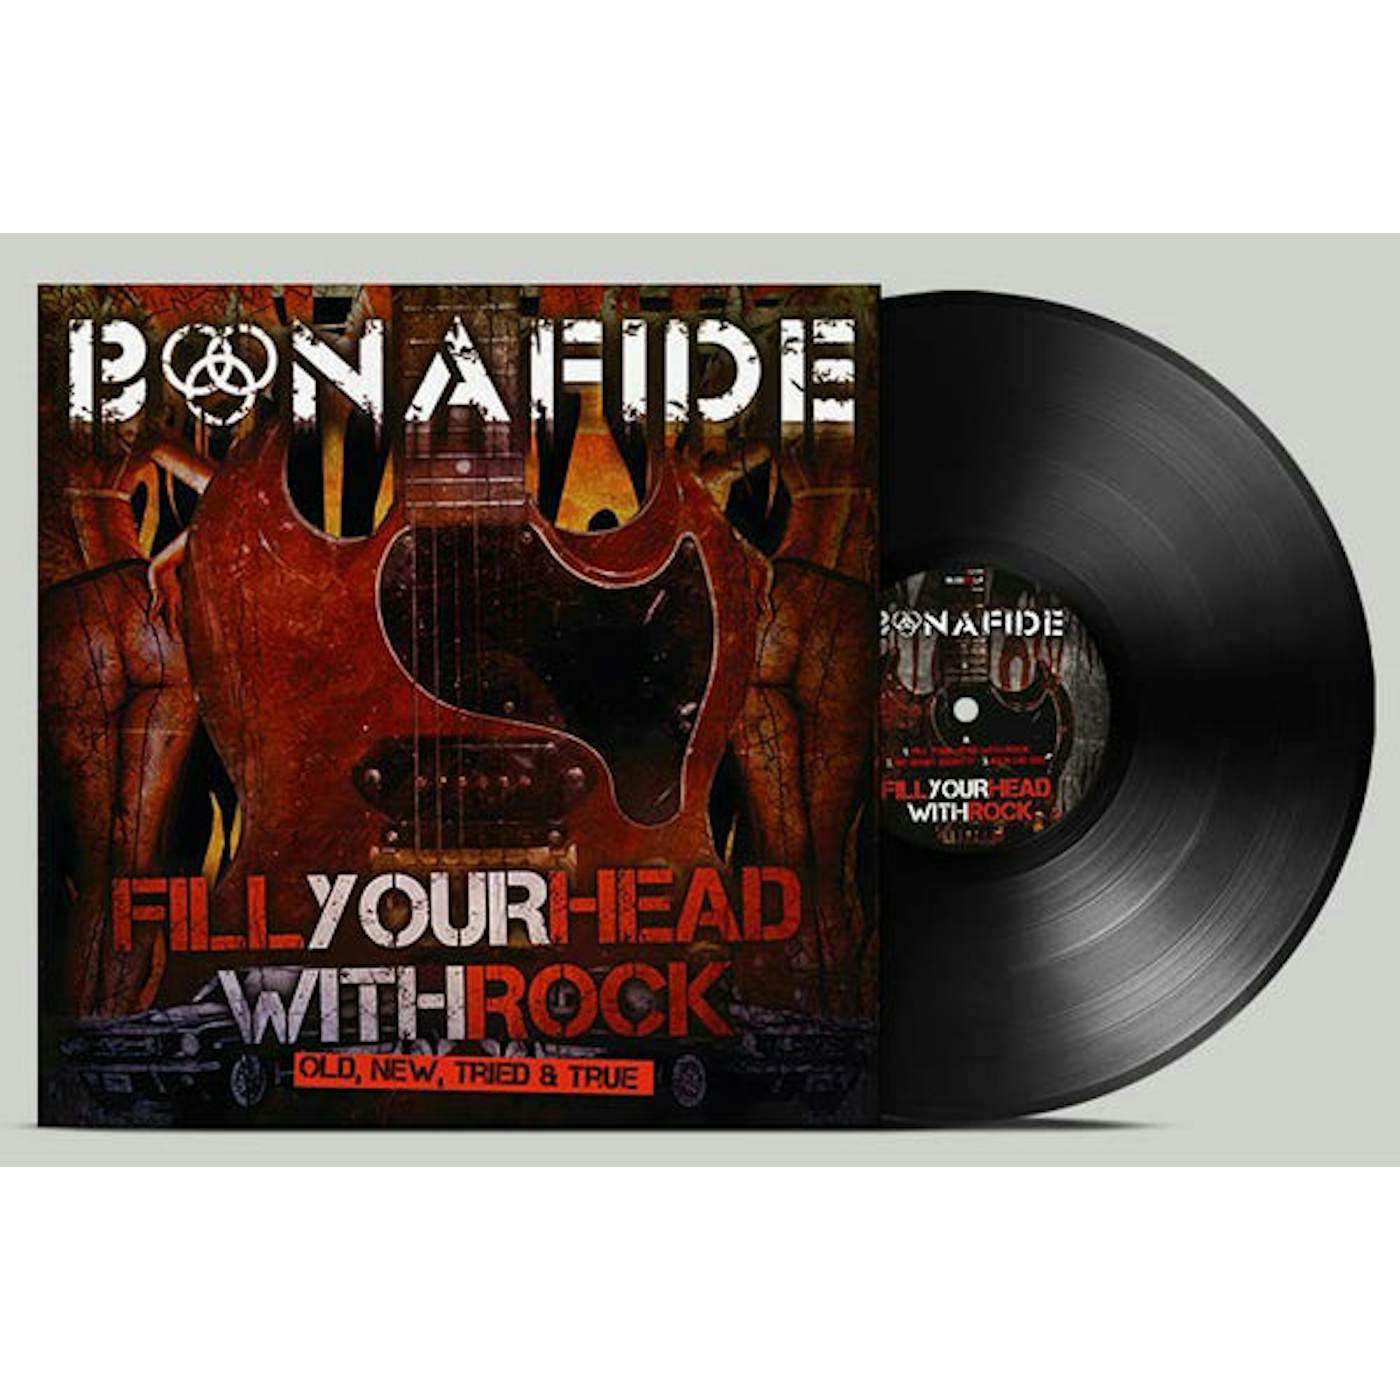 Bonafide LP - Fill Your Head With Rock - Old New Tried & True (Vinyl)